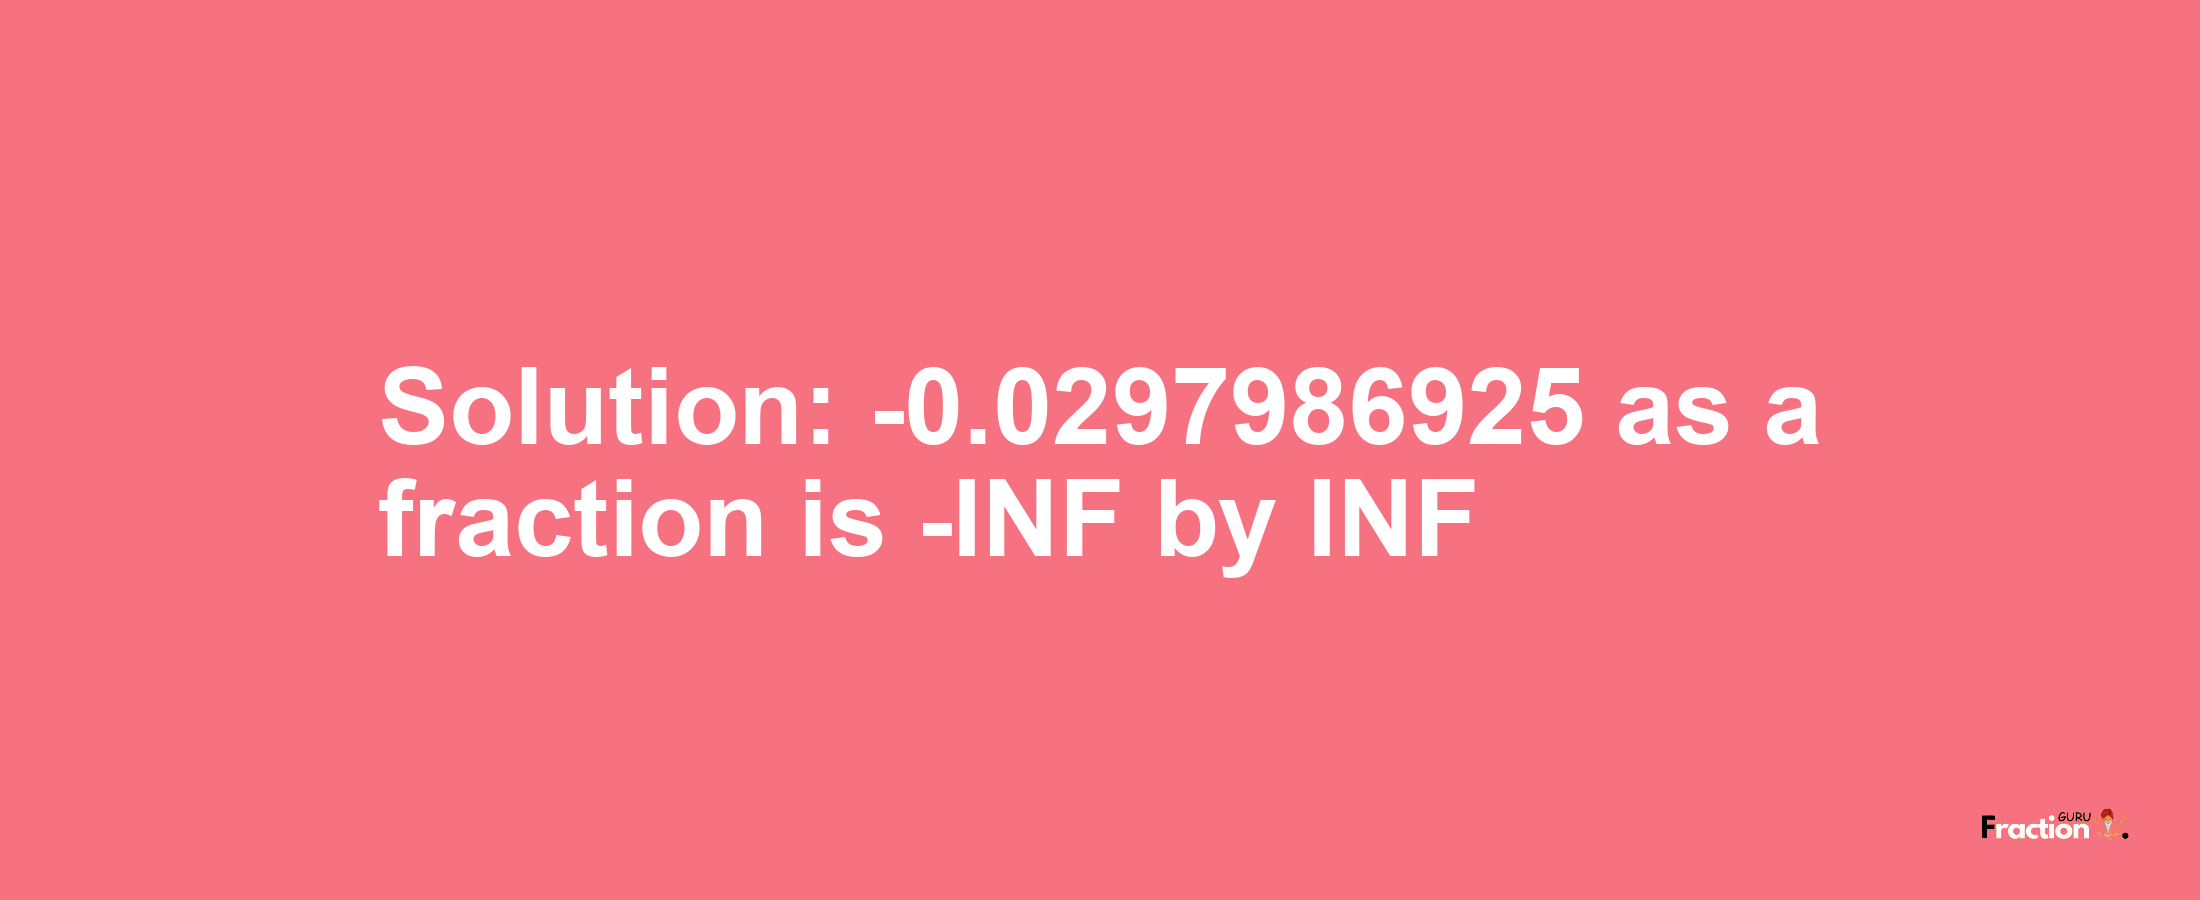 Solution:-0.0297986925 as a fraction is -INF/INF